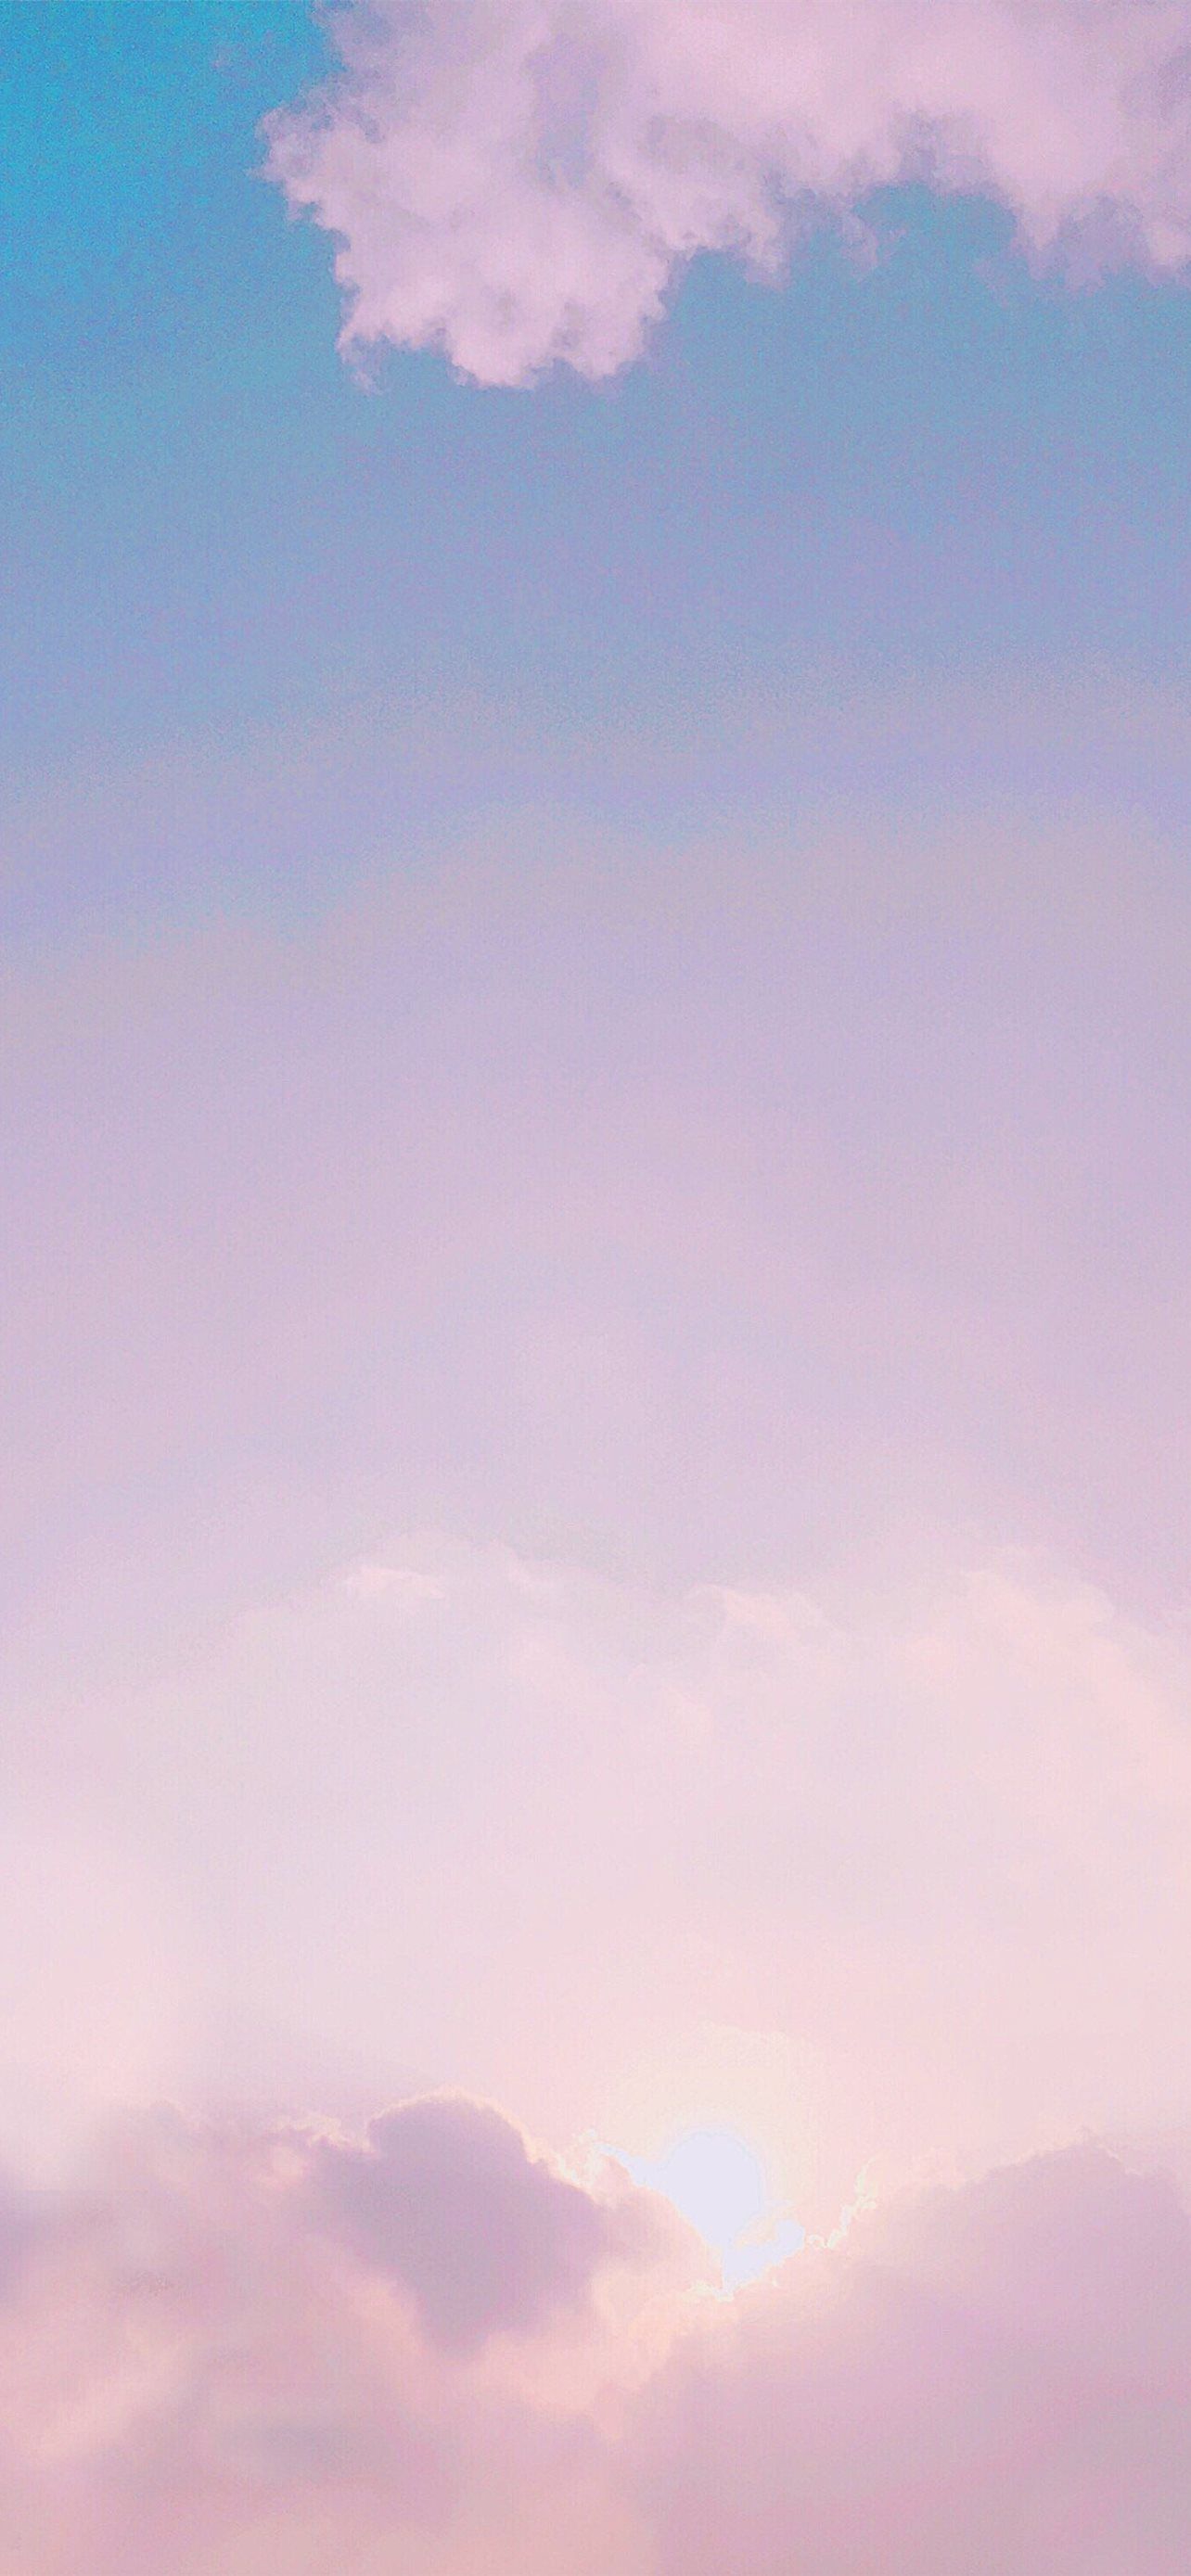 photo of pink and blue clouds iPhone 12 Wallpaper Free Download